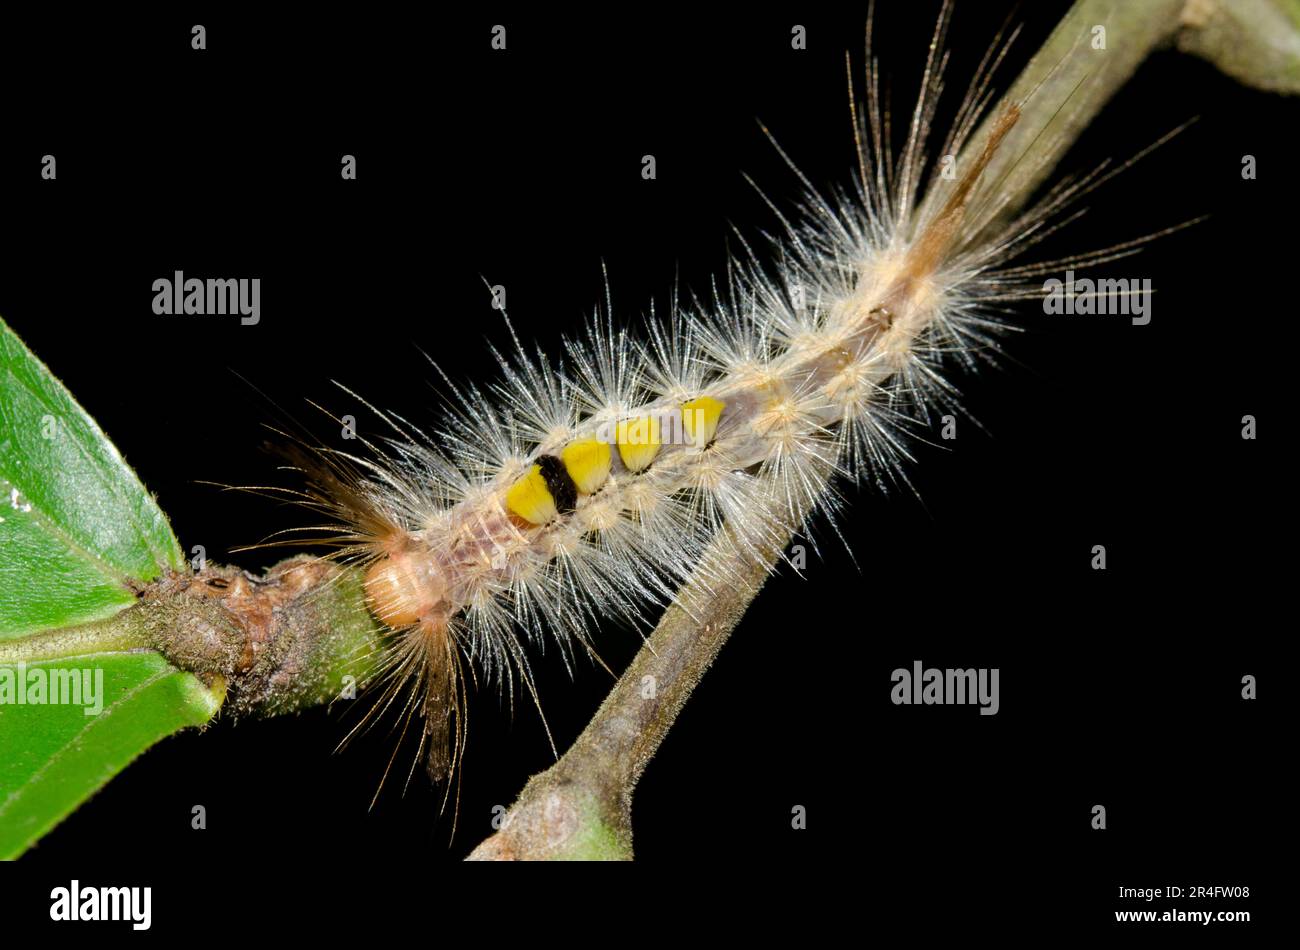 Tussock Moth Caterpillar, Lymantriidae Family, with long hairs for protection on stem, Klungkung, Bali, Indonesia Stock Photo